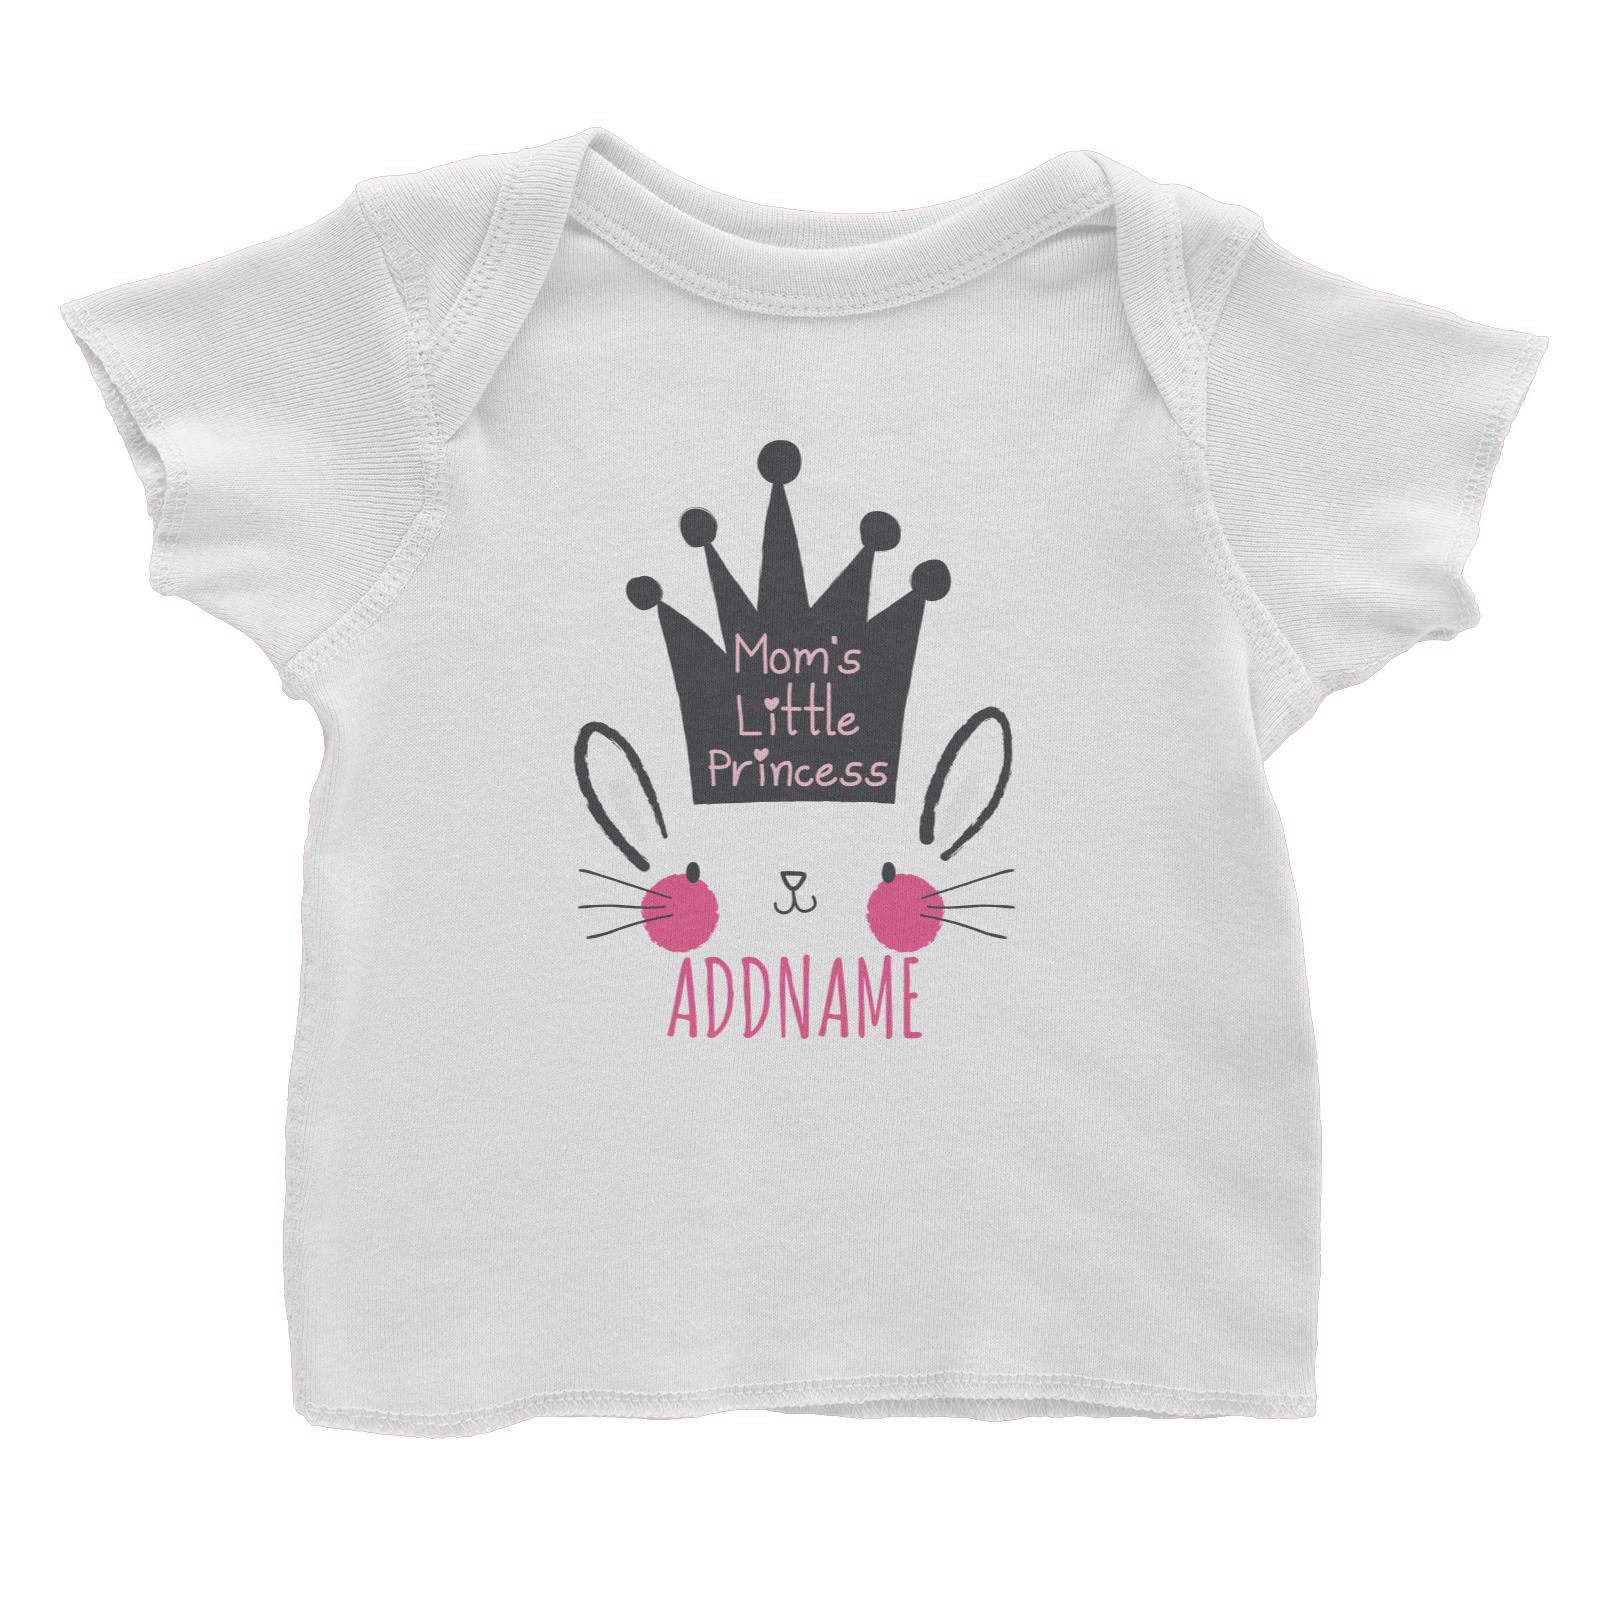 Mom's Little Princess Bunny Addname Baby T-Shirt